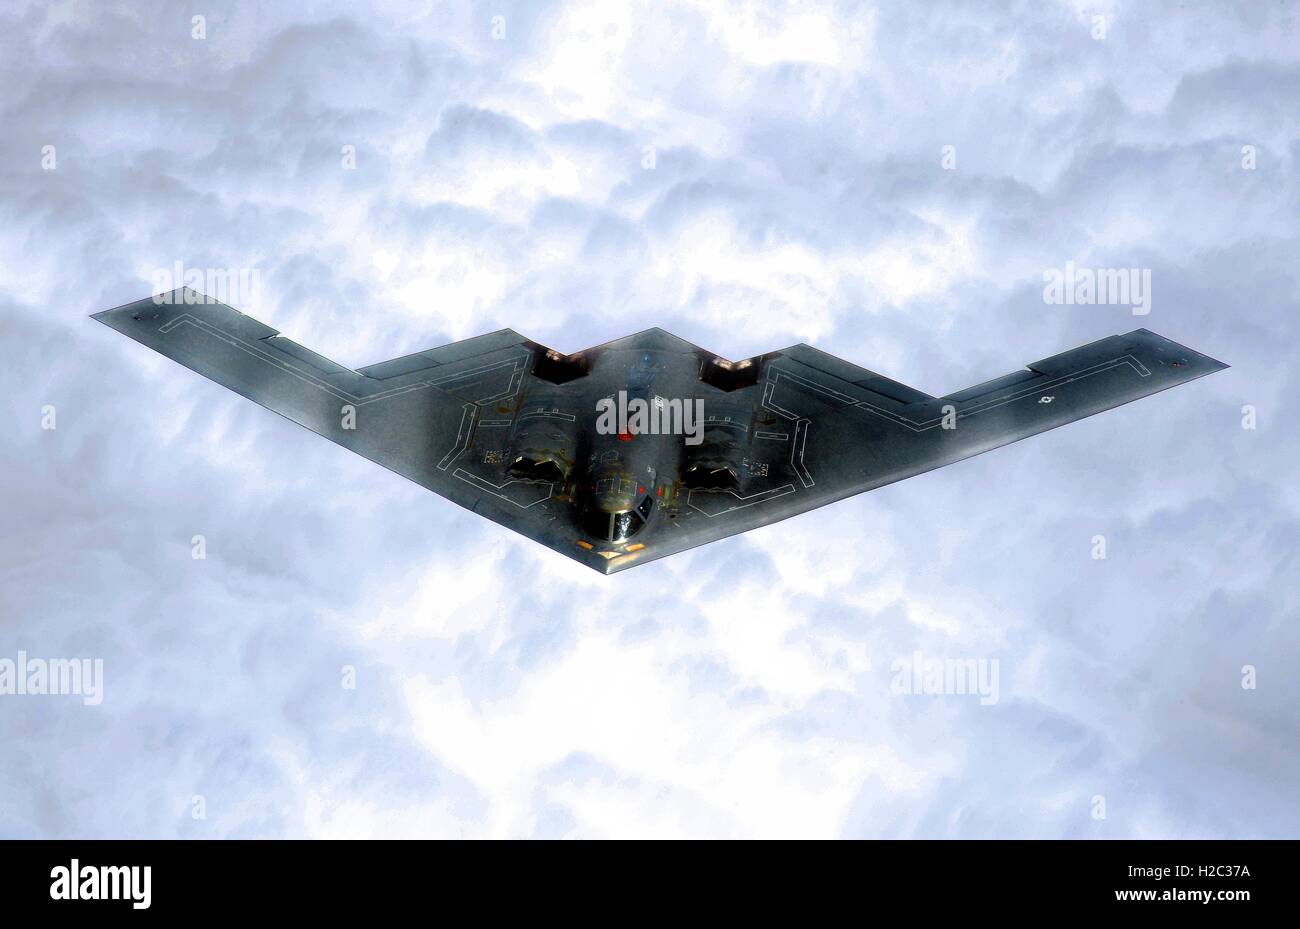 A U.S. Air Force B-2 Spirit stealth strategic bomber flies over the clouds after taking off from the Whiteman Air Force Base October 30, 2002 in Johnson County, Missouri. Stock Photo